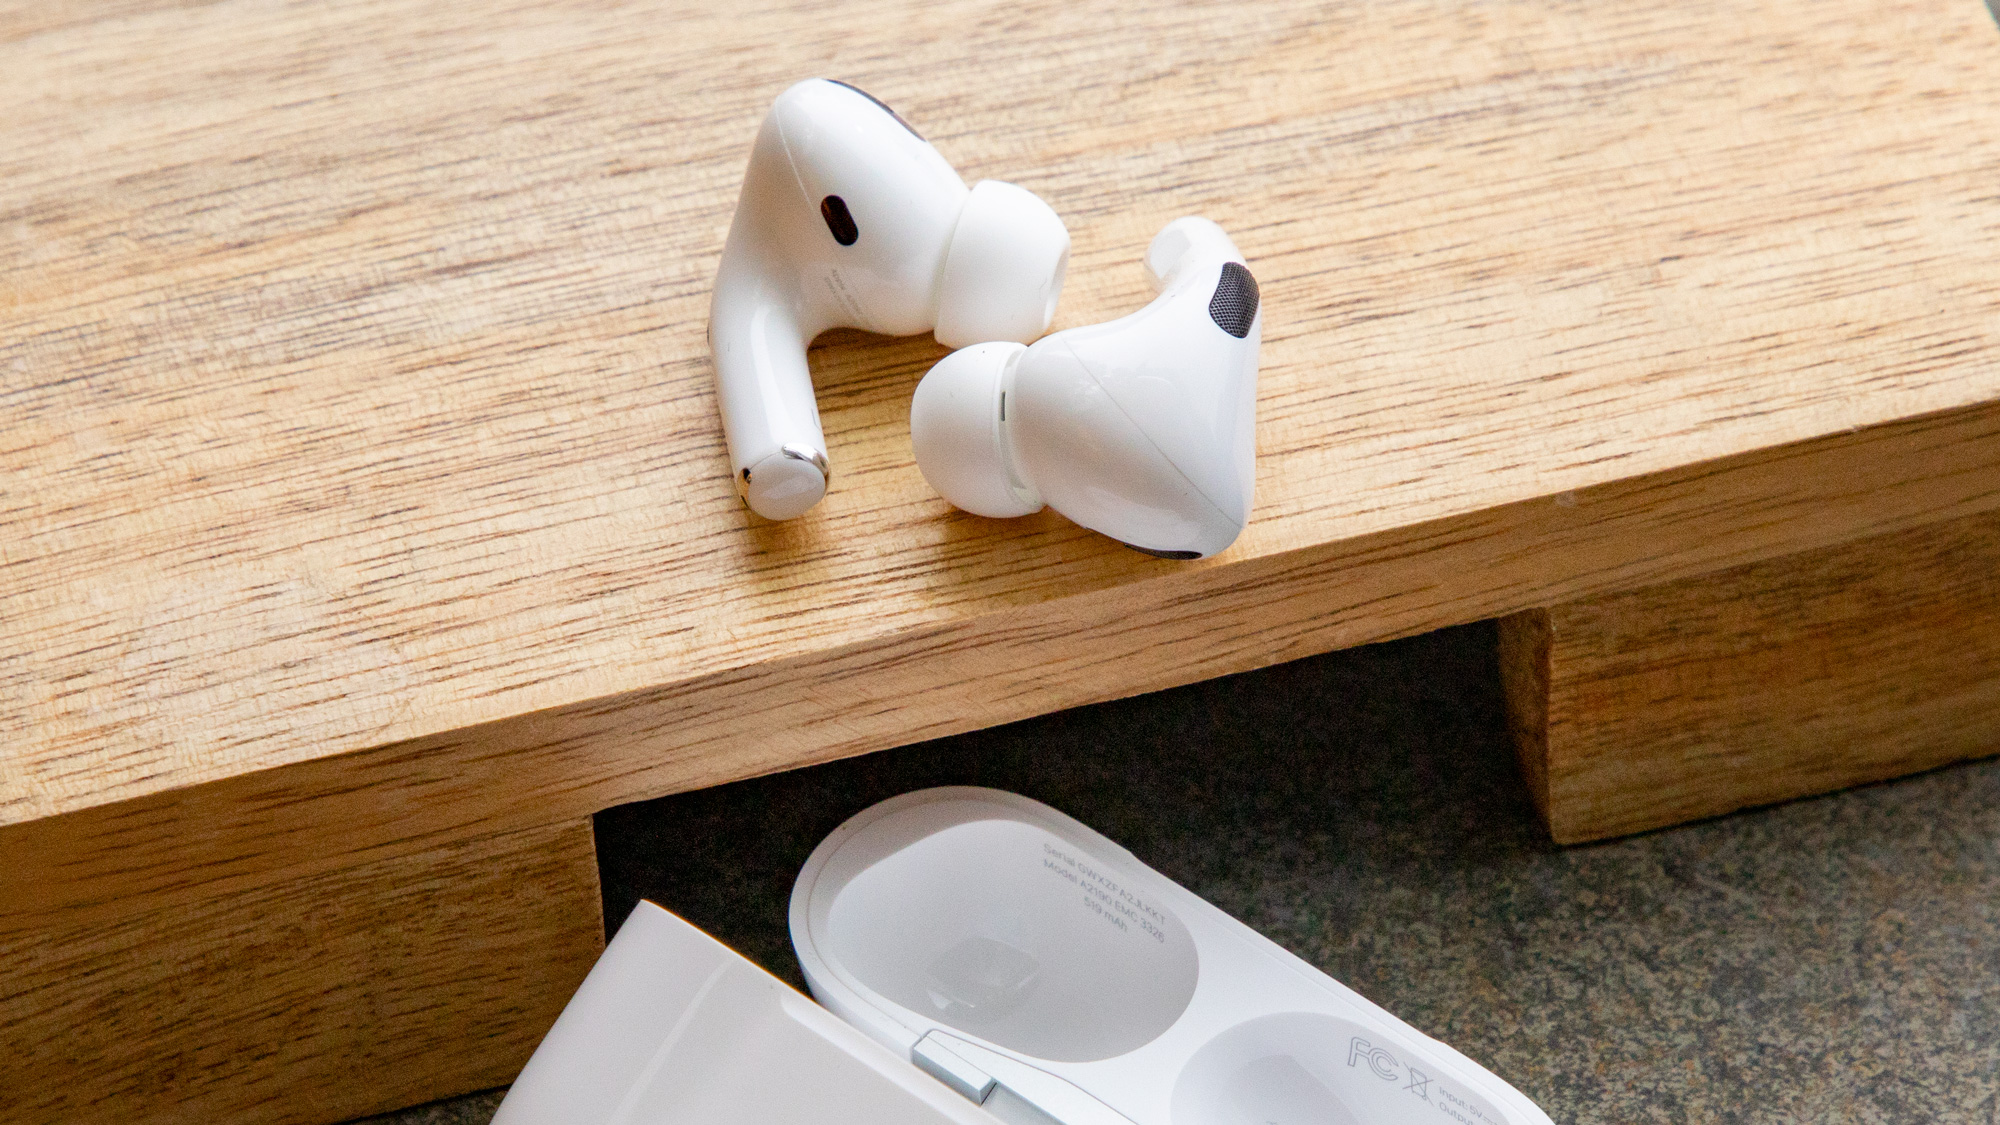 the AirPods Pro wireless earbuds on a wooden surface